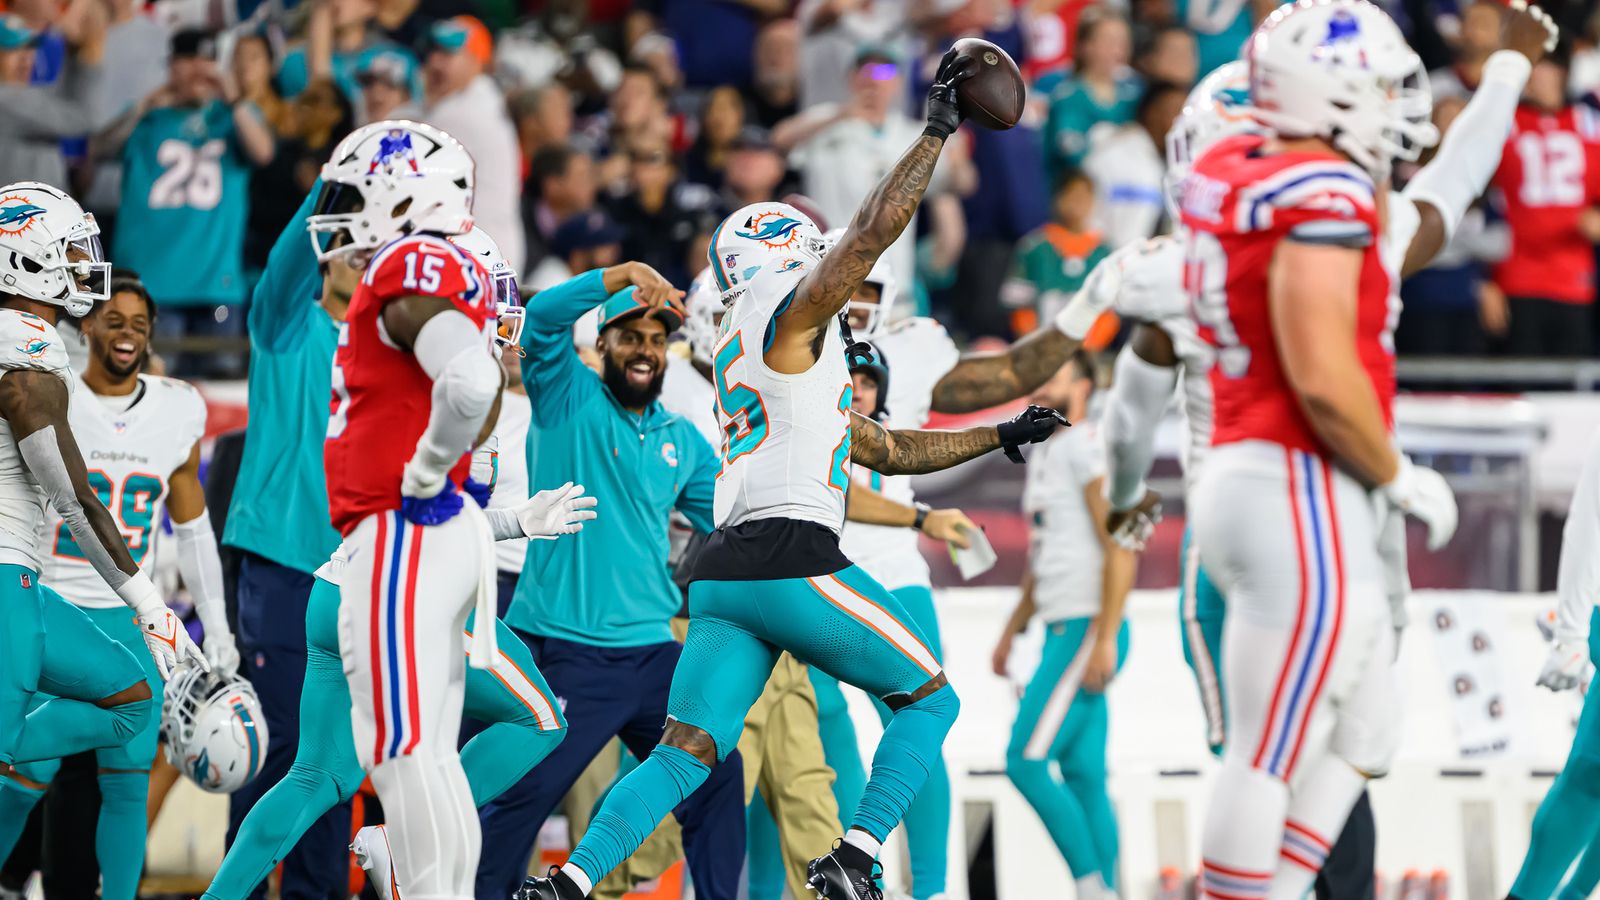 If Patriots can't beat mediocre Dolphins, New England could be in